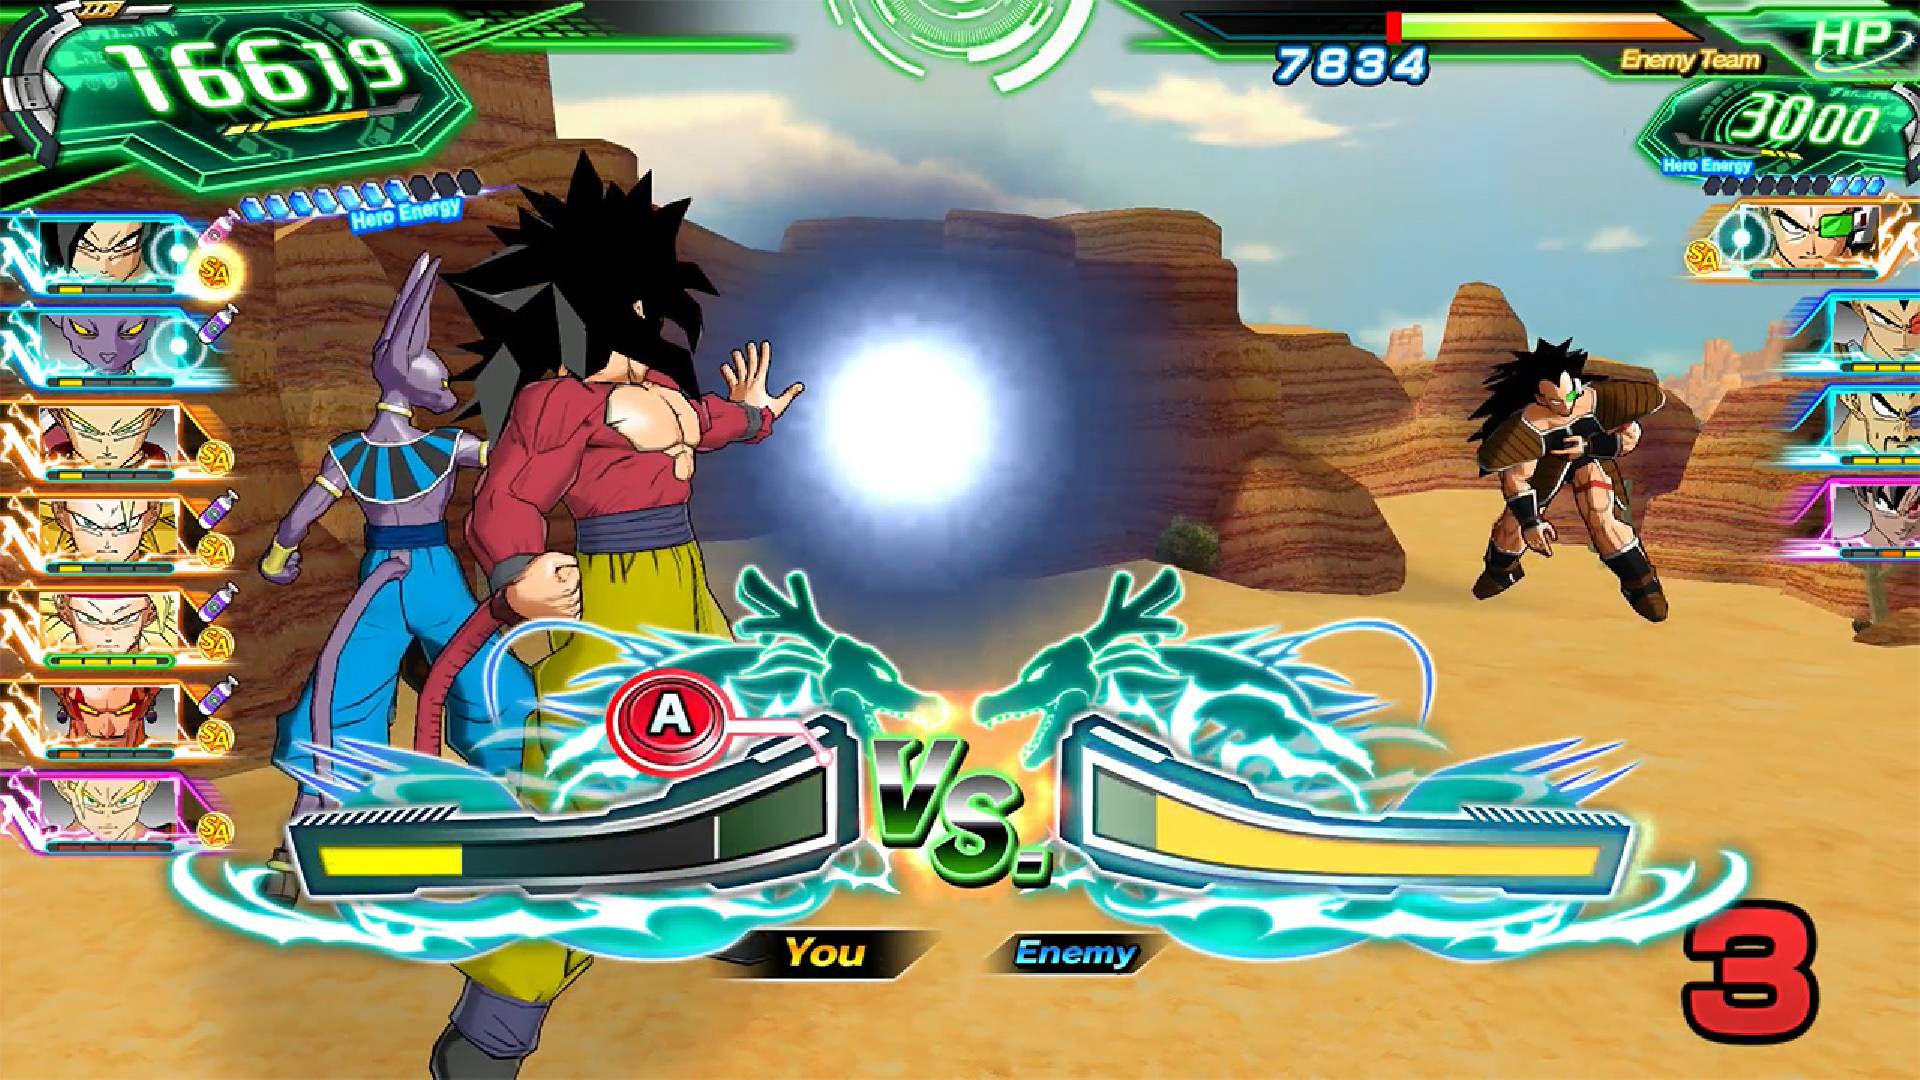 10 Best DRAGON BALL Games for Android & iOS (NO EMULATOR) OFFLINE